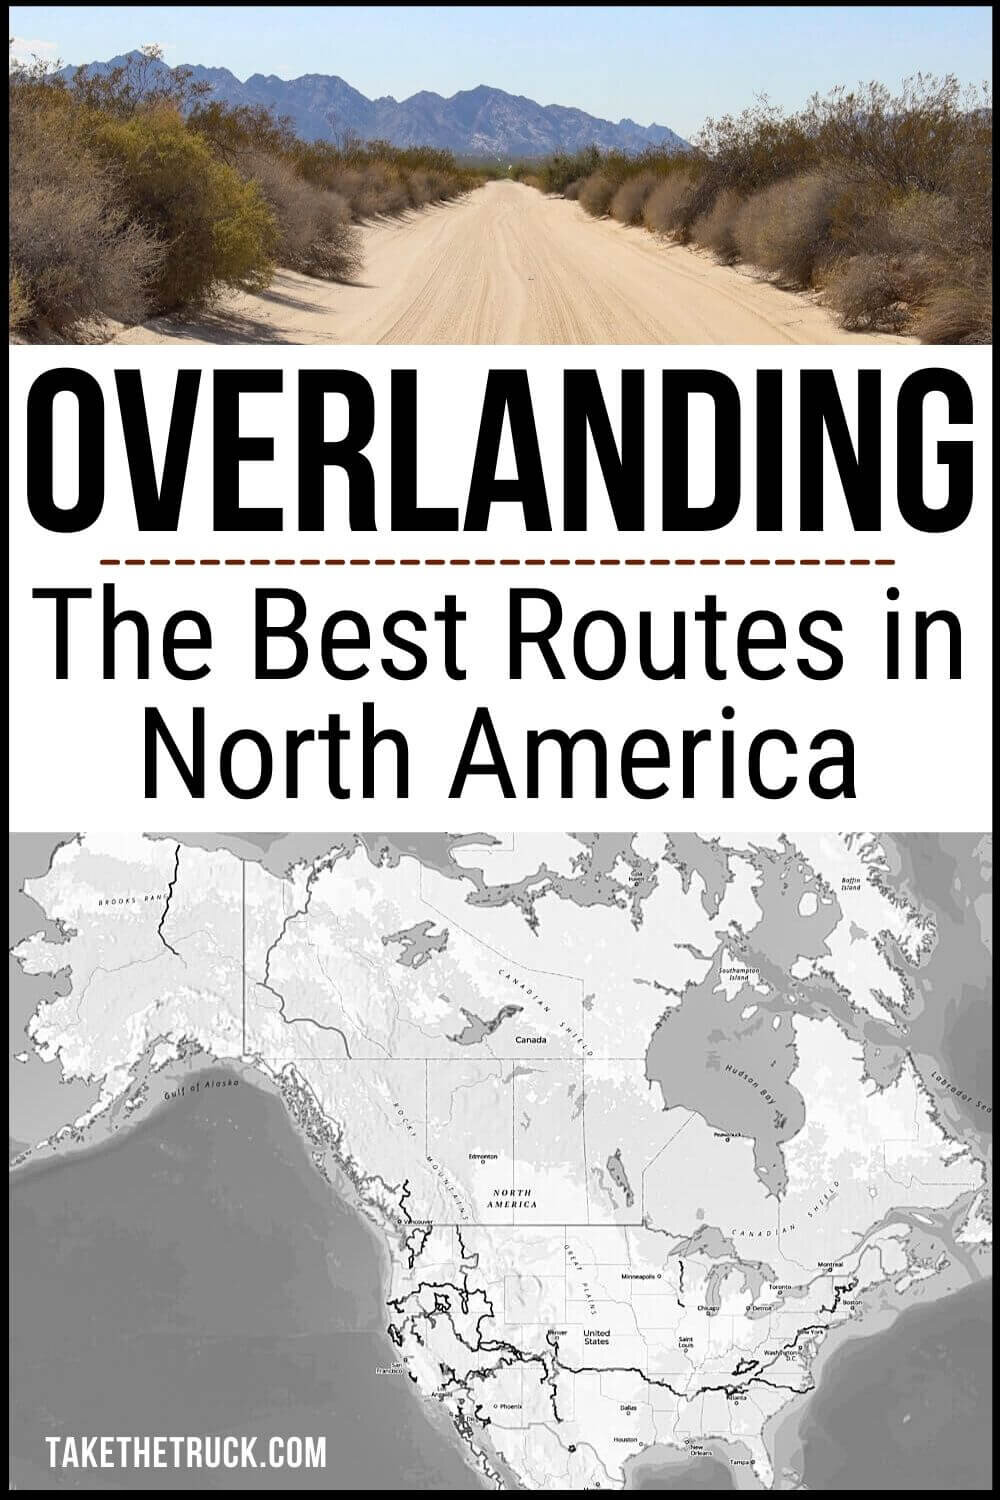 Overlanding routes and off road trails to improve your 4x4 &amp; overland travel skills! From difficult overlanding routes &amp; off road trails to overlanding road trips, there’s something for you!